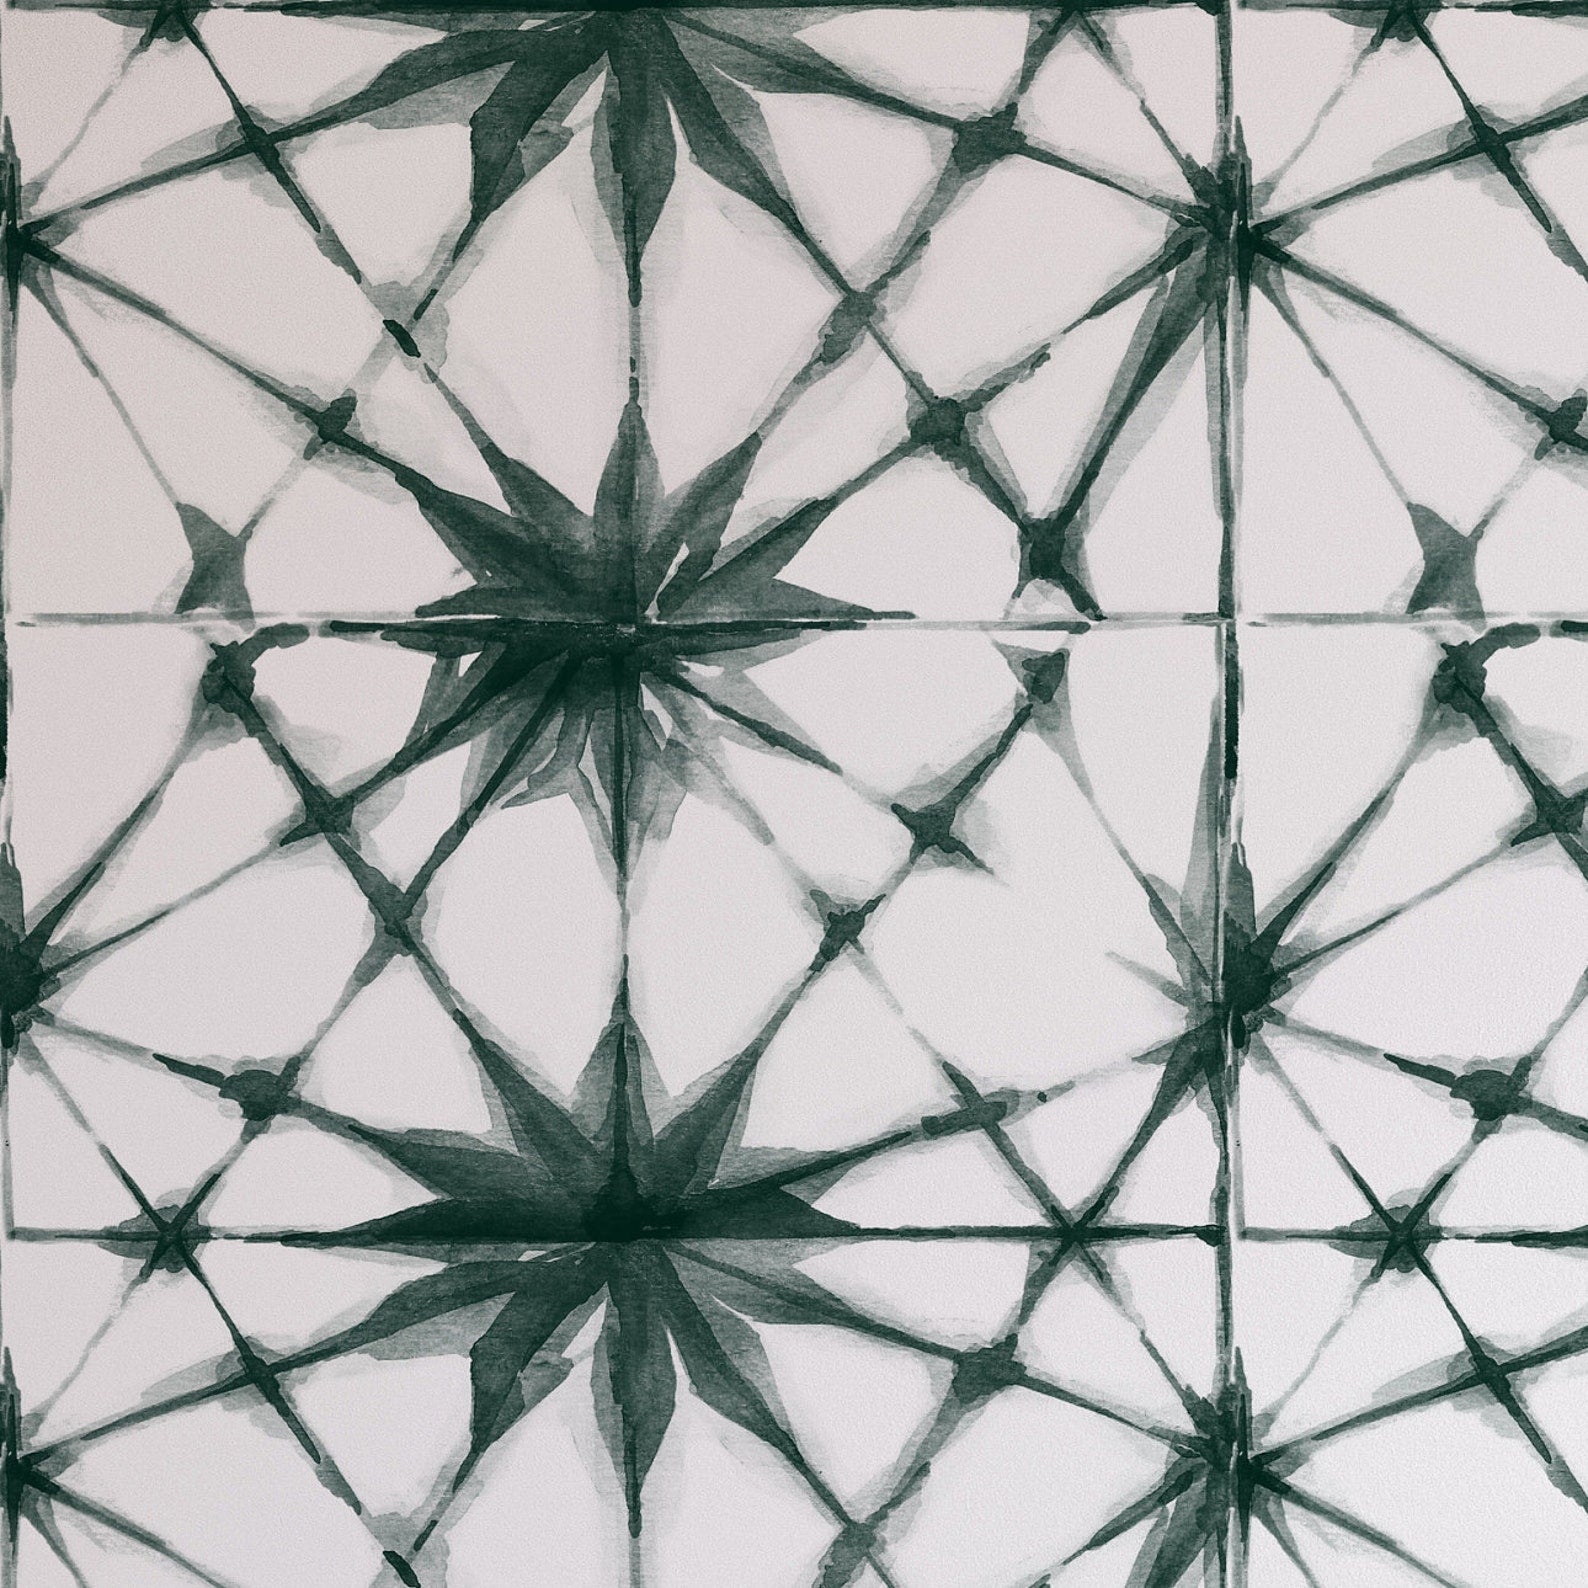 Close-up view of a watercolor wallpaper with a Shibori Star pattern in shades of green, focusing on the geometric star shapes interconnected by thin lines, giving a hand-painted aesthetic.